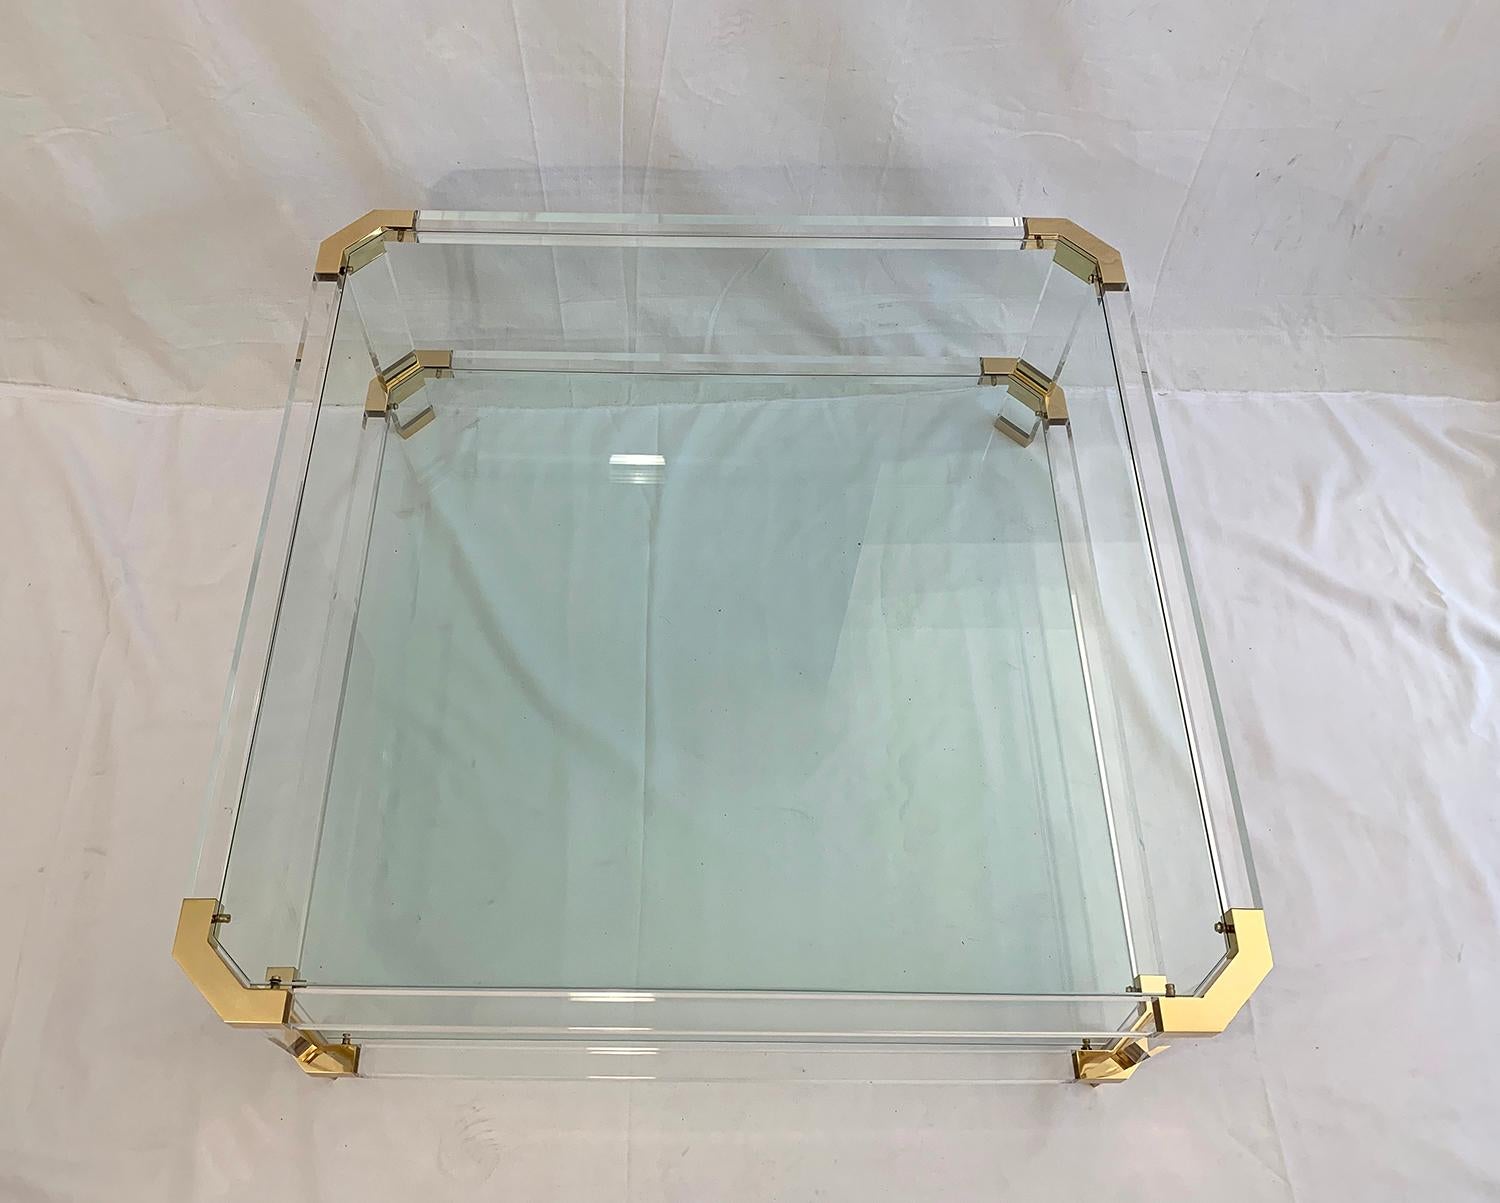 Large coffee table with two glass shelves in the style of Charles Hollis or Maison Jansen, The windows are removable and the frame is made of lucite with corners in polished brass. Manufacture around 1970.


Grande table de salon avec deux étagères